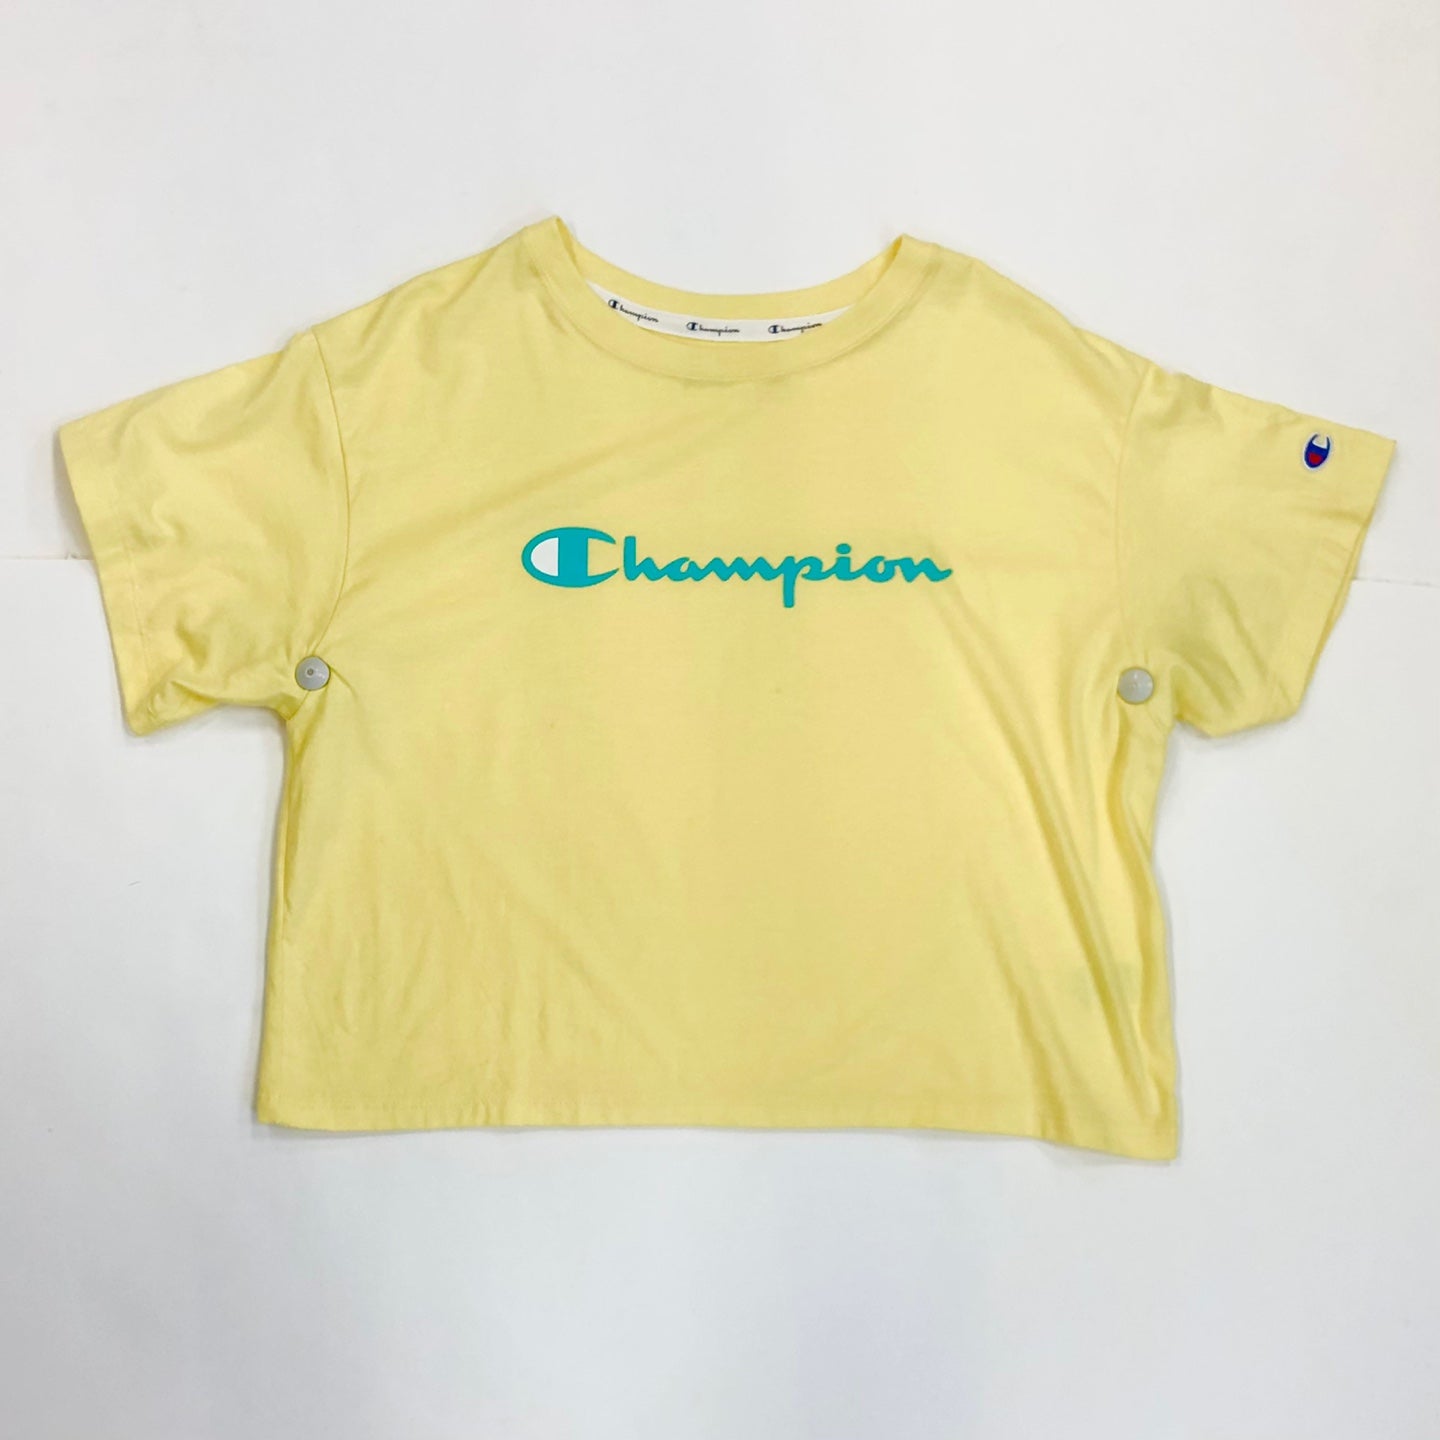 Champion Women's The Cropped Graphic T-Shirt